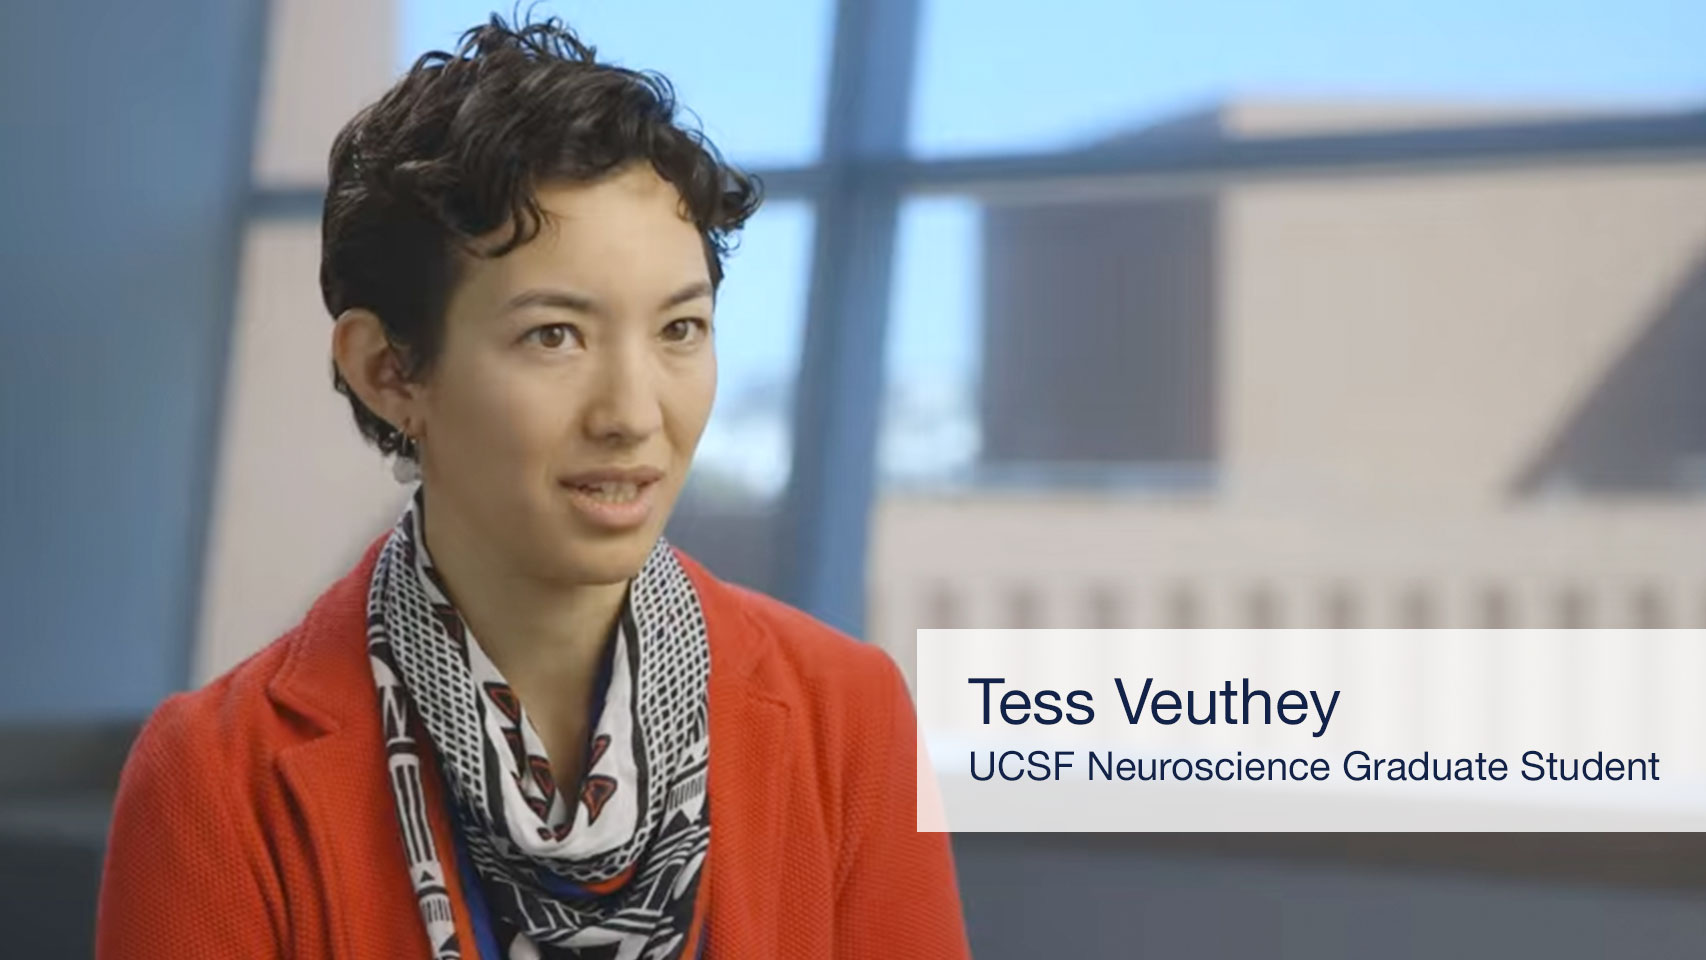 Video still of Tess Veuthey, showing a lower third